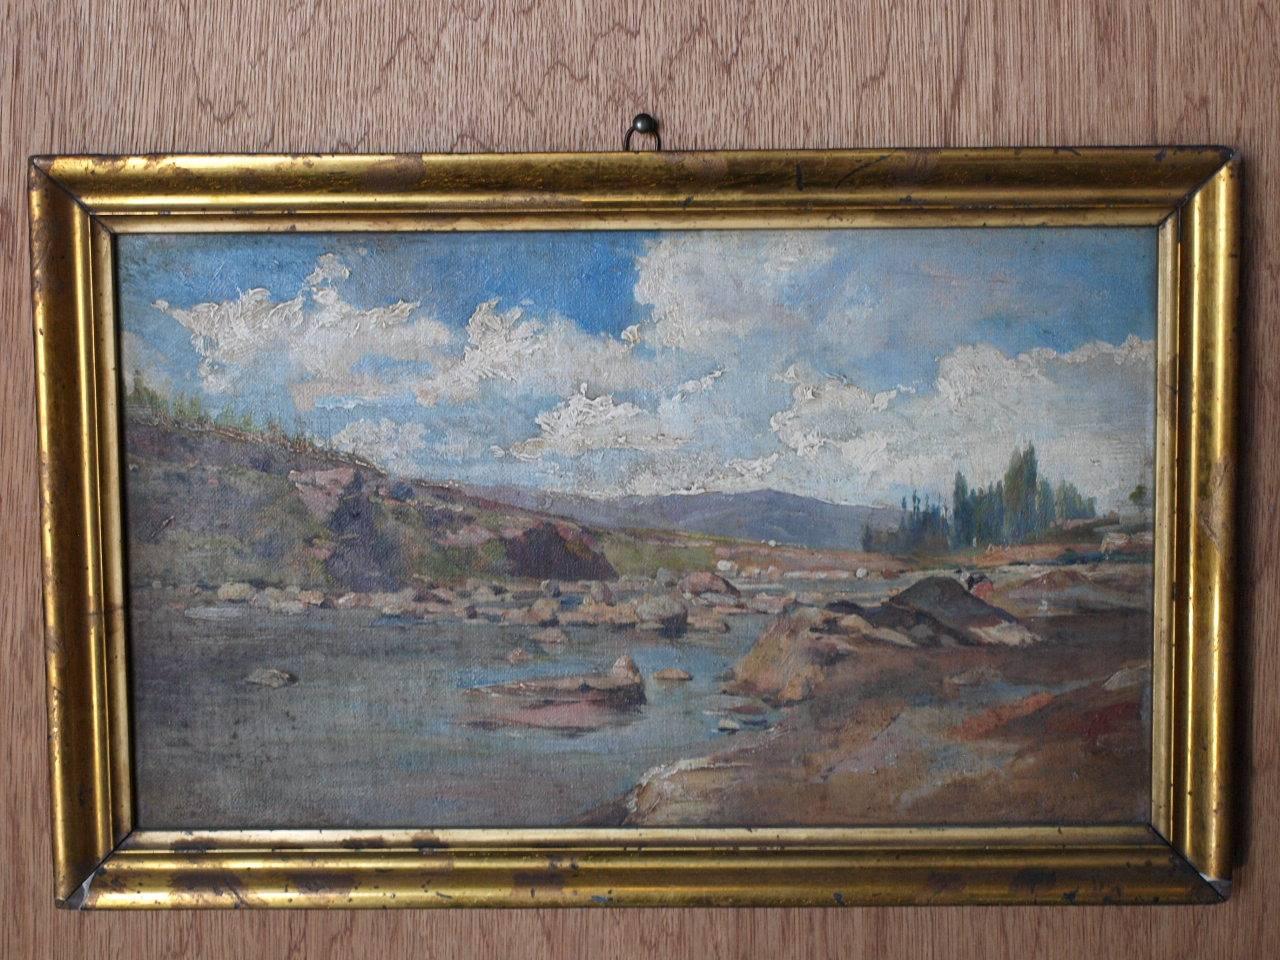 A delightful and very charming later 19th century oil on canvas landscape painting of the Spanish country side. Wonderful brush work. Housed in a handsome giltwood frame.